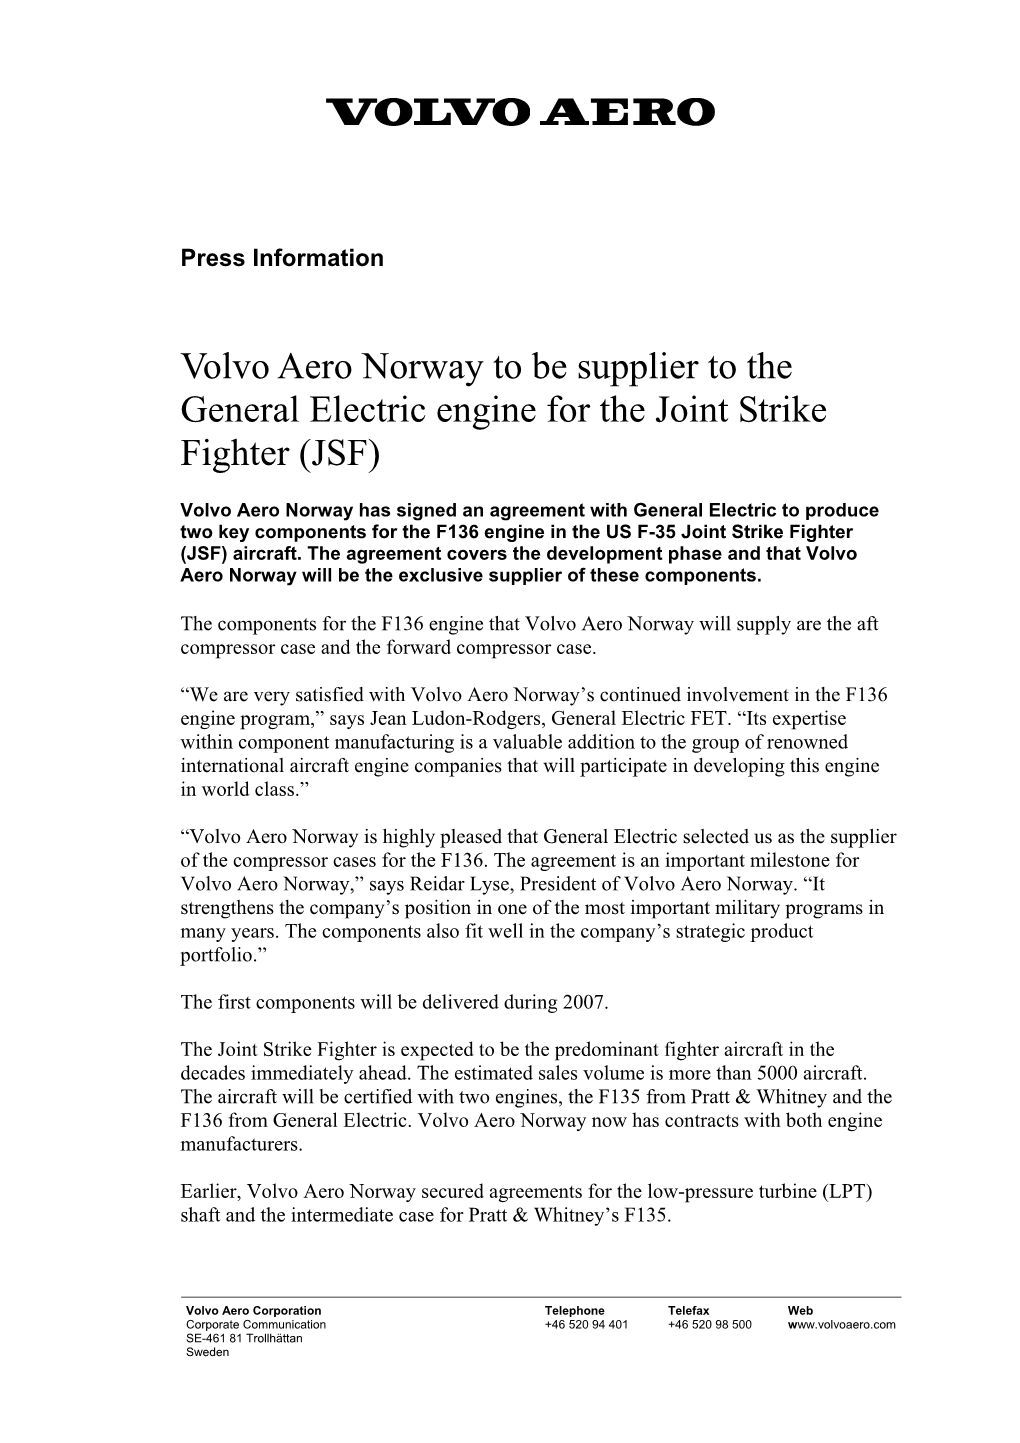 Volvo Aero Norway to Be Supplier to the General Electric Engine for the Joint Strike Fighter (JSF)